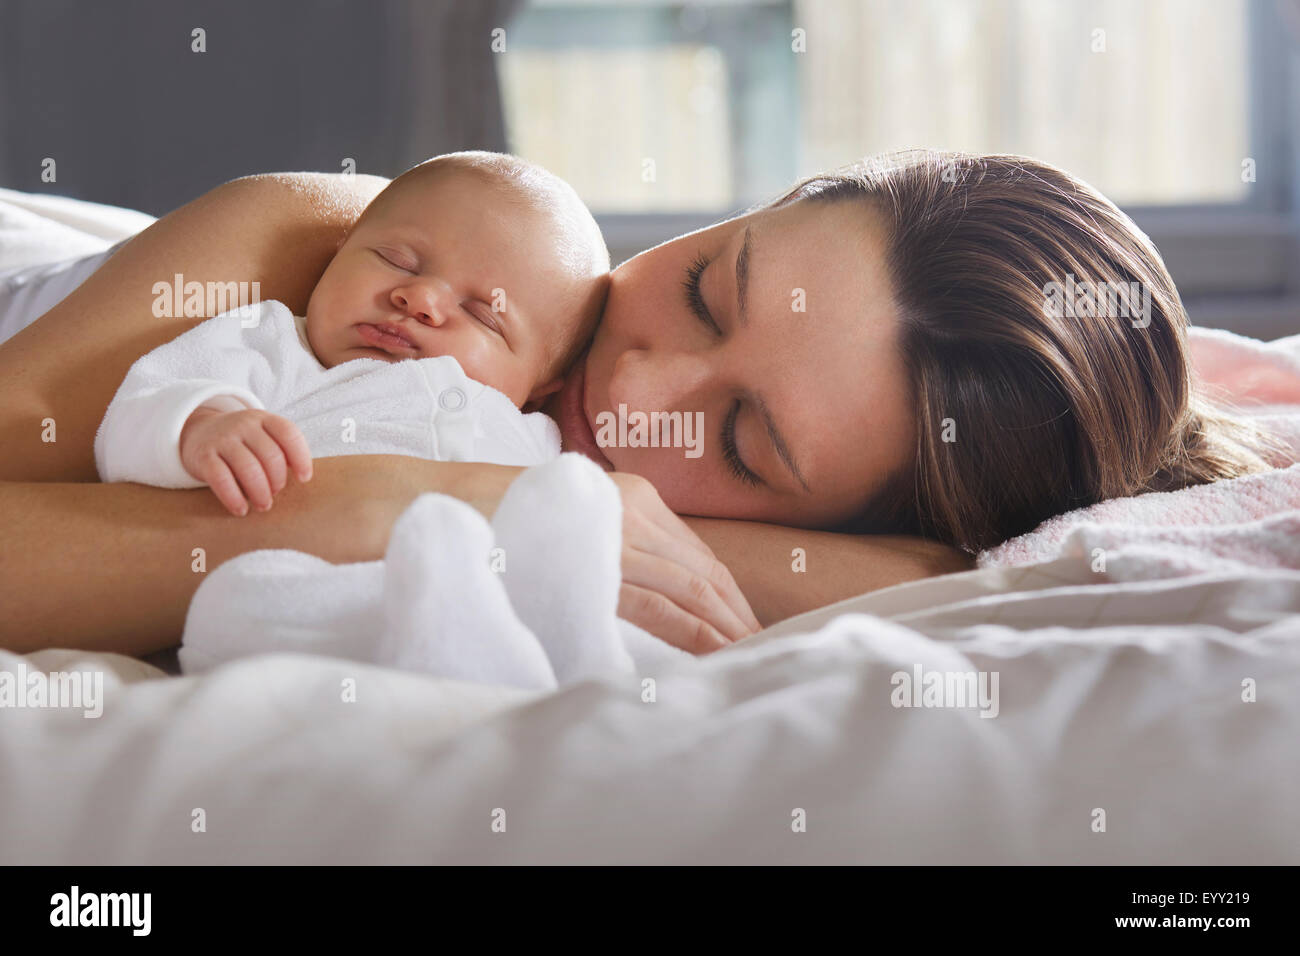 Mother hugging newborn baby on bed Stock Photo